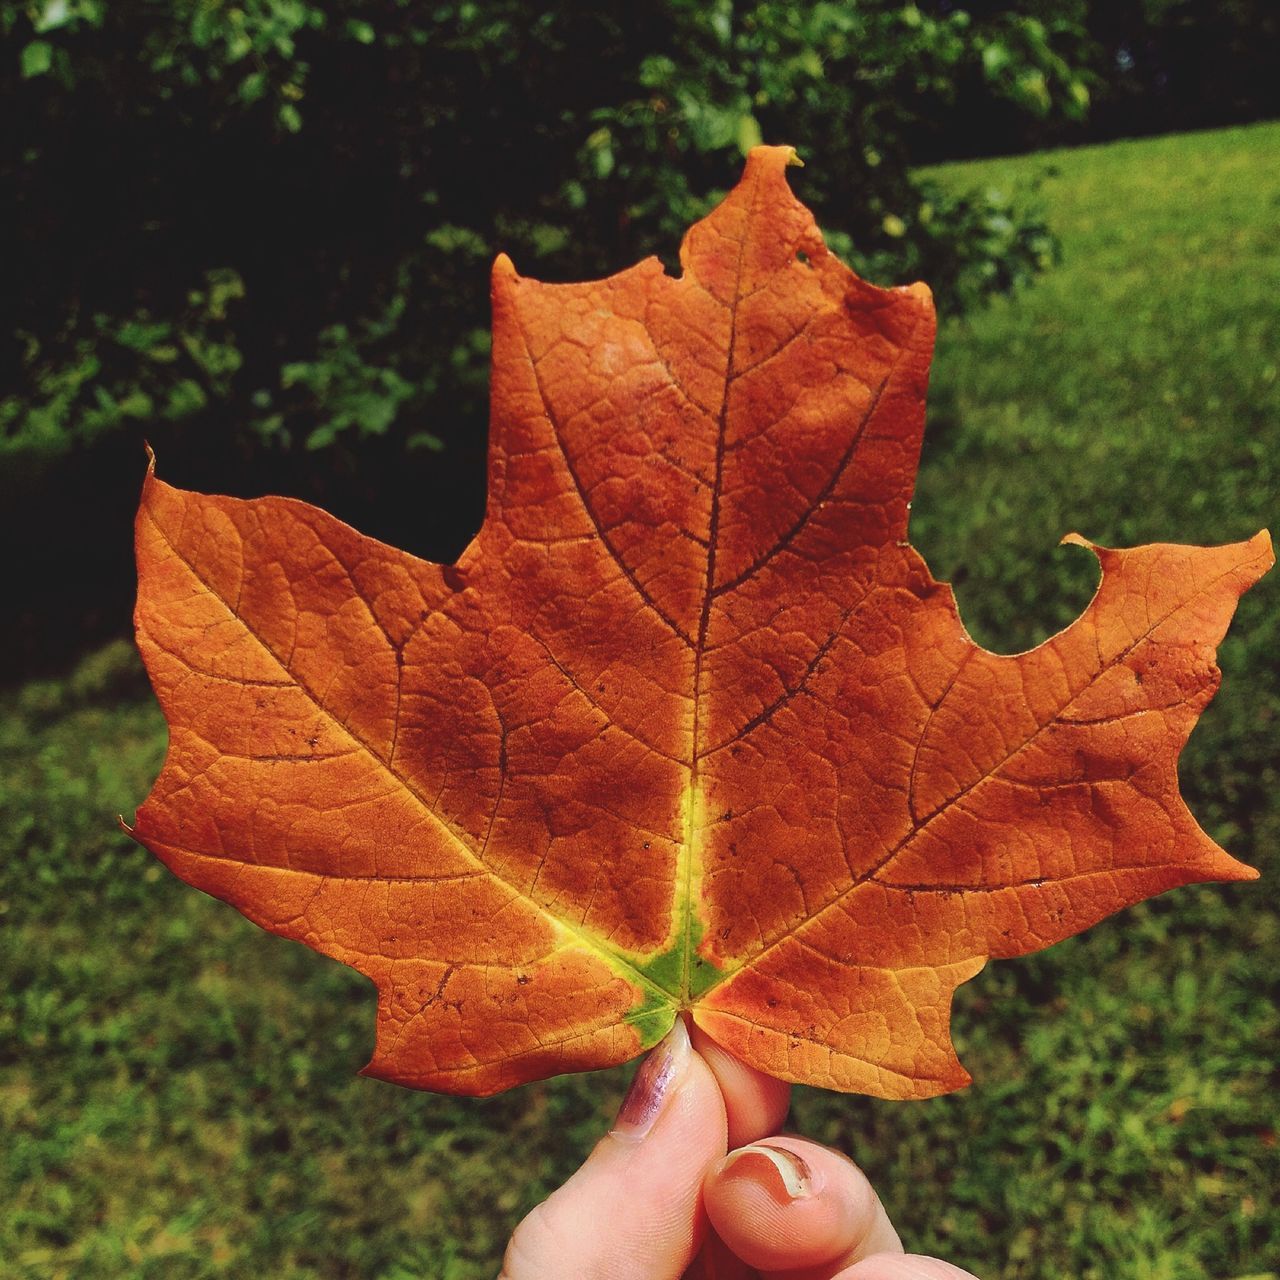 person, leaf, leaf vein, autumn, part of, holding, human finger, close-up, focus on foreground, unrecognizable person, cropped, change, maple leaf, personal perspective, season, orange color, dry